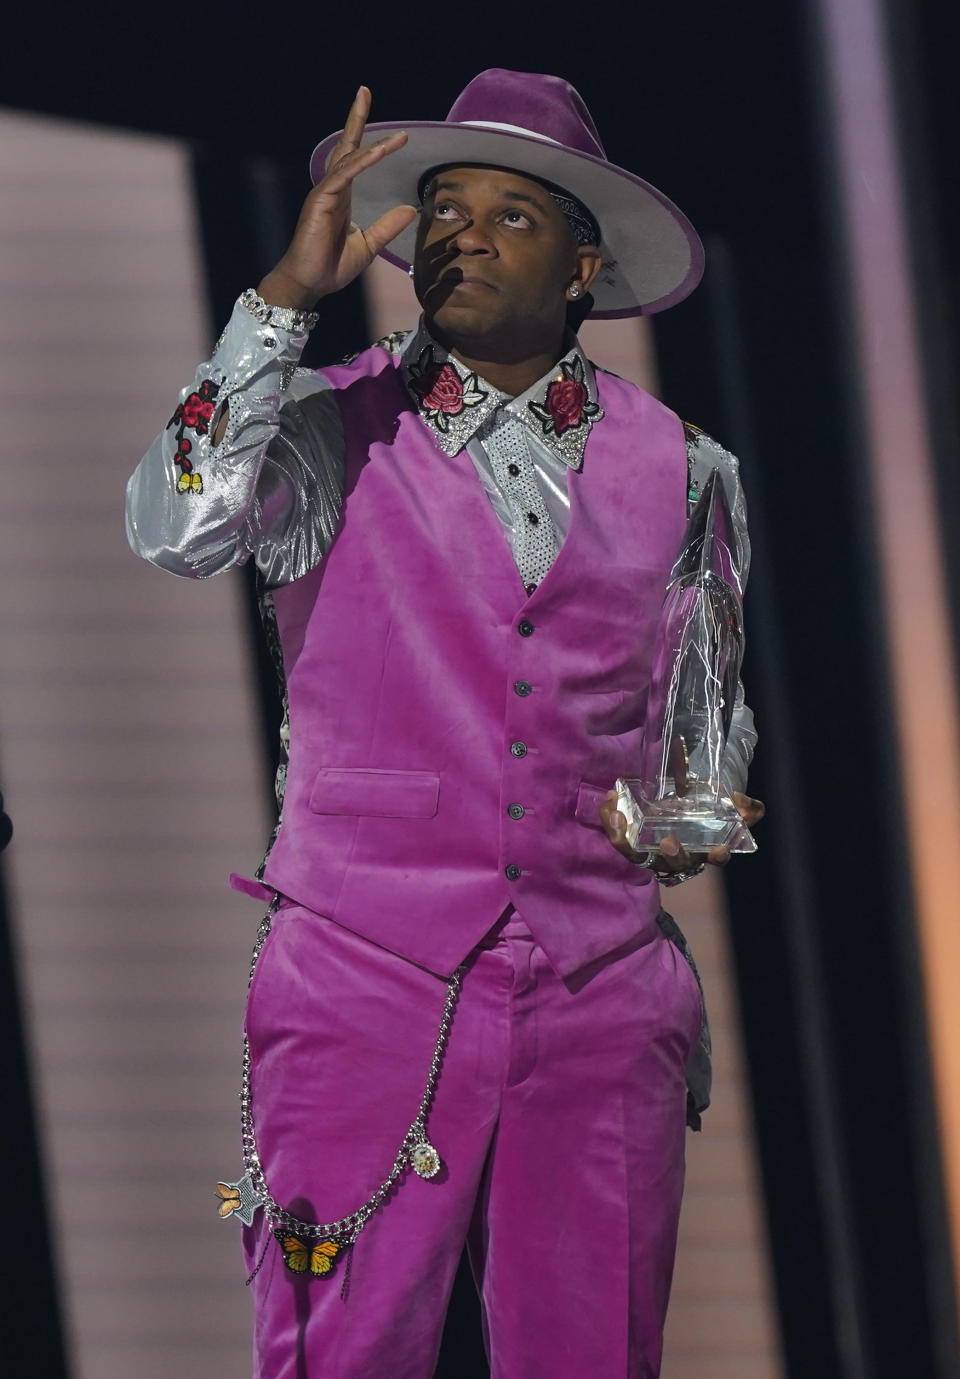 Jimmie Allen reacts as he accepts the new artist of the year award at the 55th annual CMA Awards on Wednesday, Nov. 10, 2021, at the Bridgestone Arena in Nashville, Tenn. (AP Photo/Mark Humphrey)